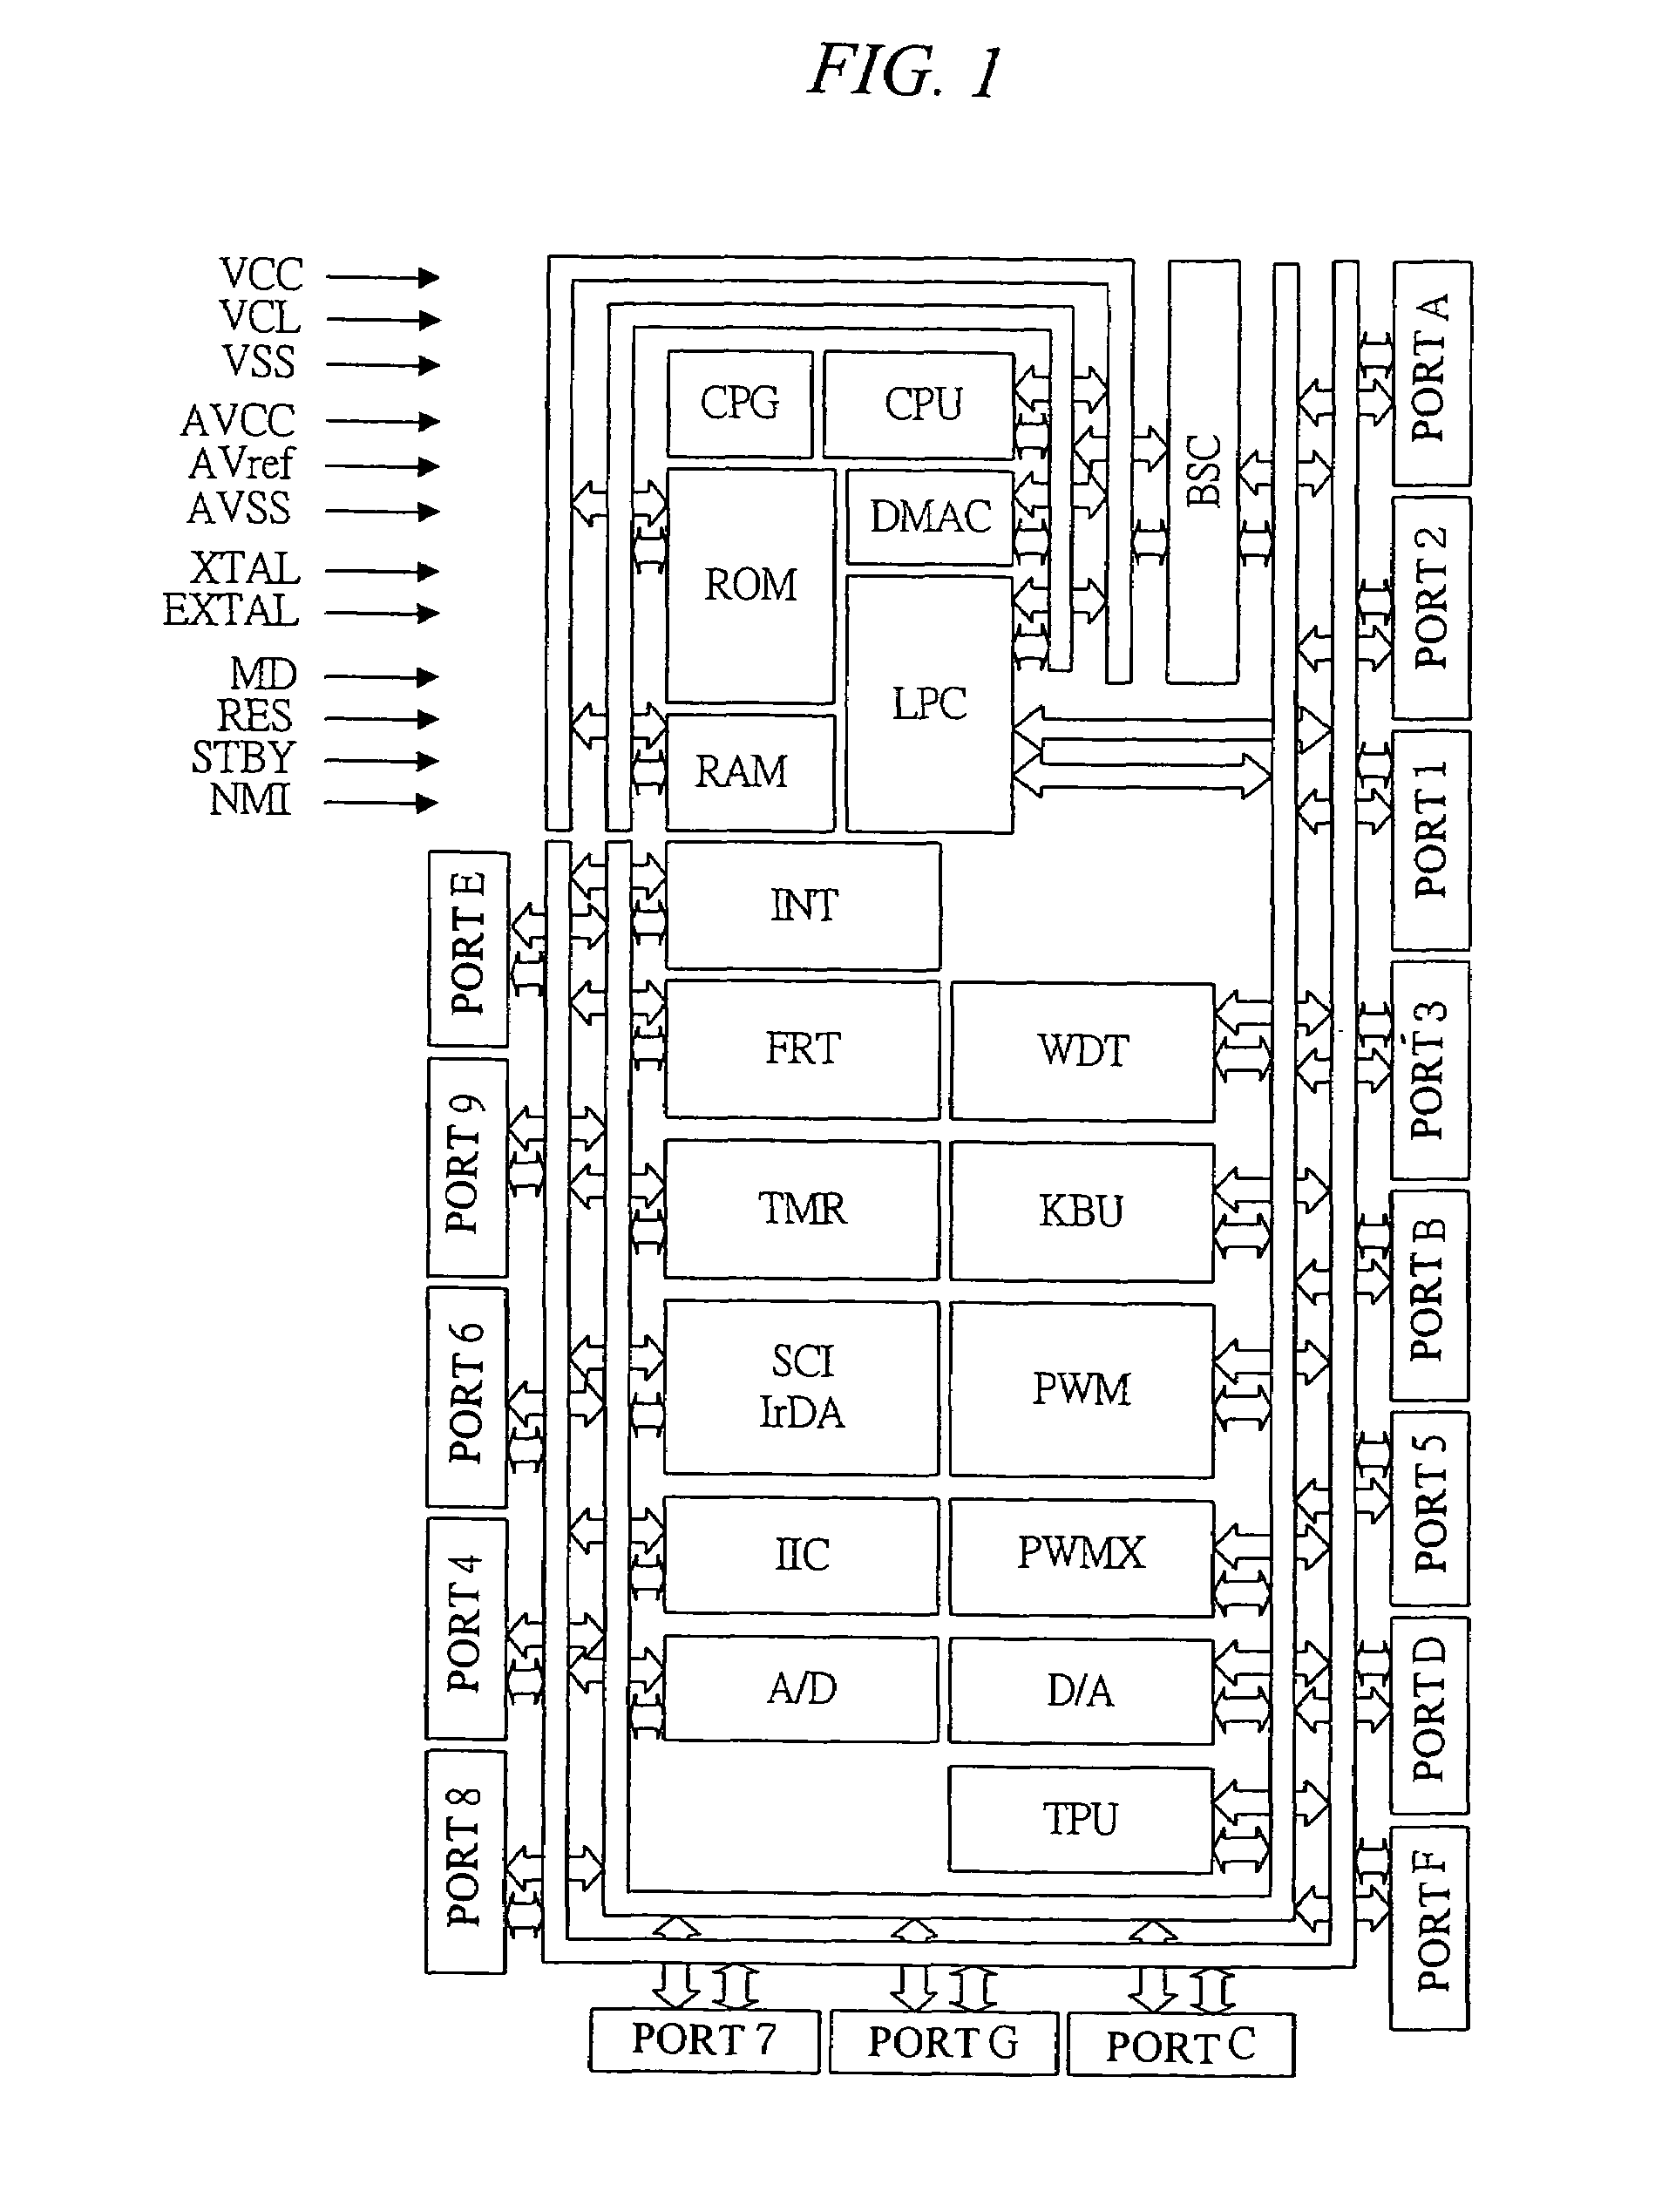 Microcomputer having a nonvolatile memory which stores a plurality of BIOSes